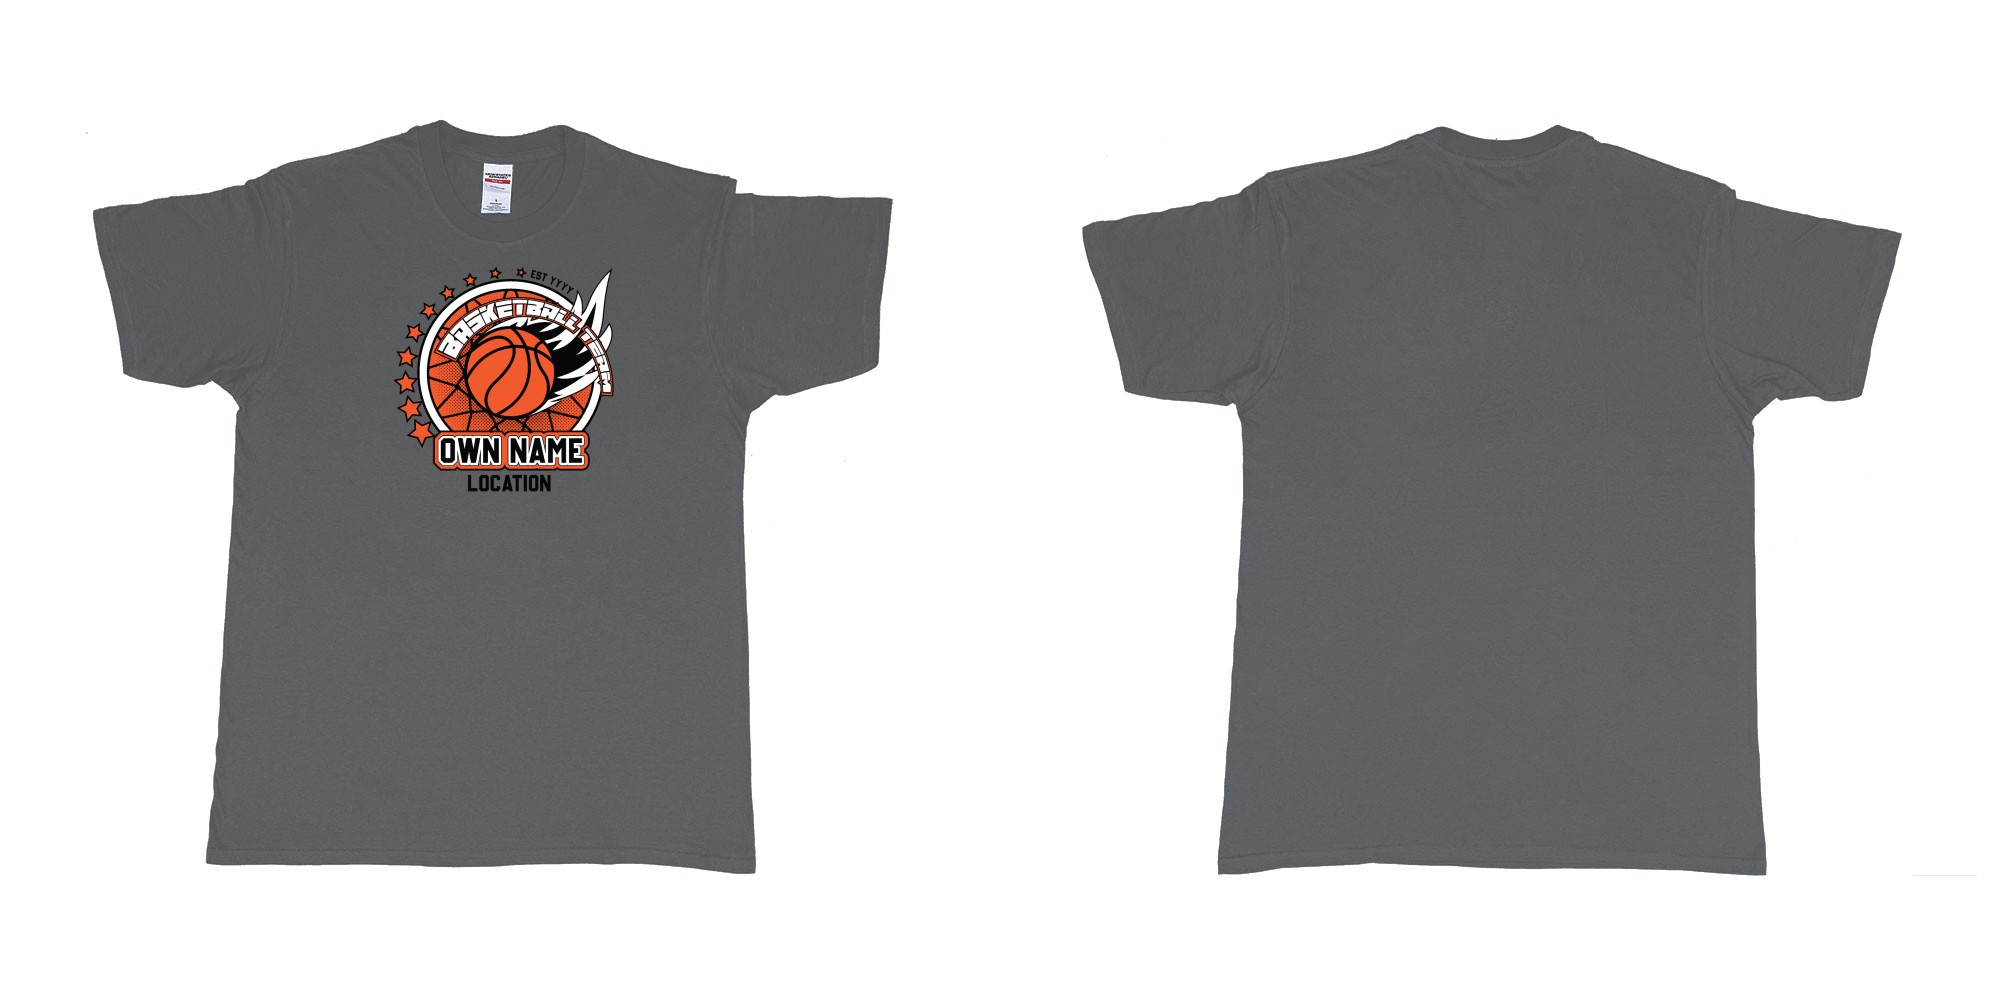 Custom tshirt design basketball team own name location established year custom design production bali in fabric color charcoal choice your own text made in Bali by The Pirate Way